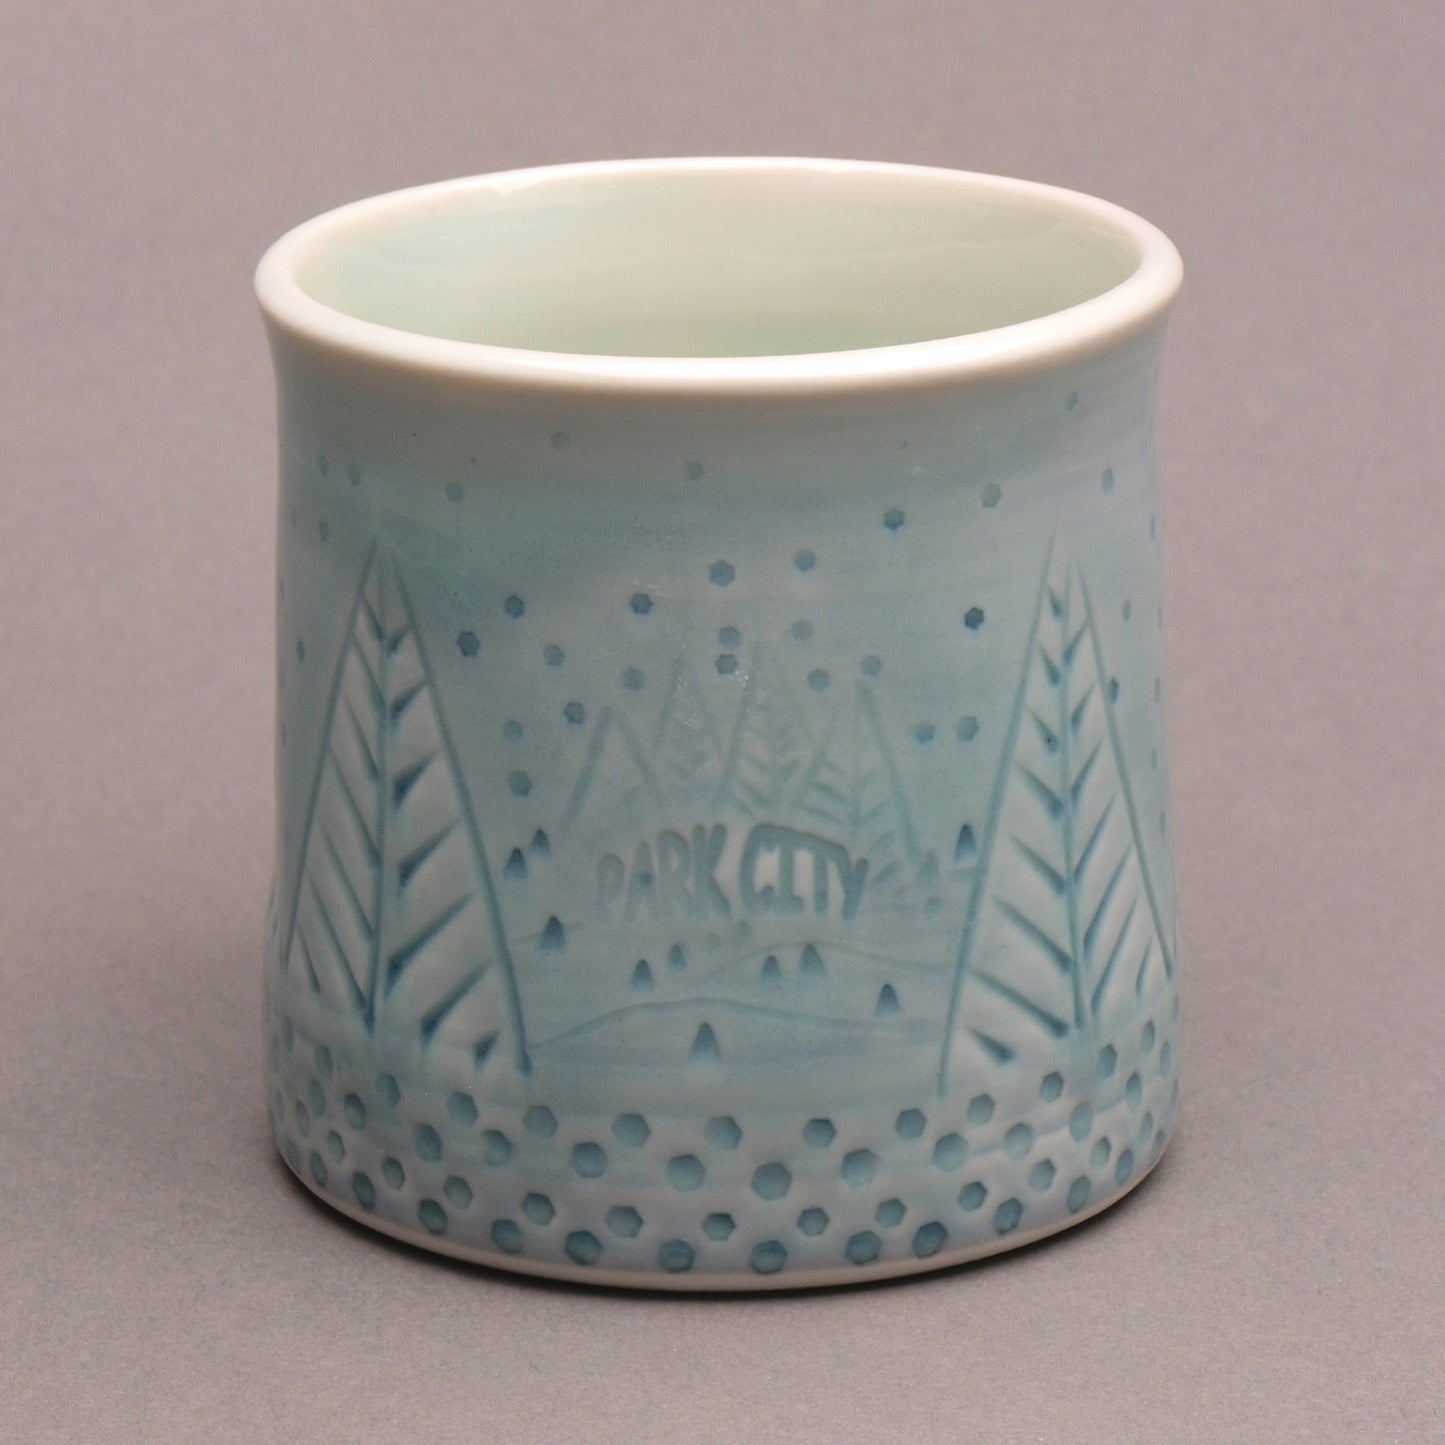 Handcrafted 'PARK CITY' Souvenir Mug with pinetrees by Mike Hays: Artistry, Comfort, and Durability